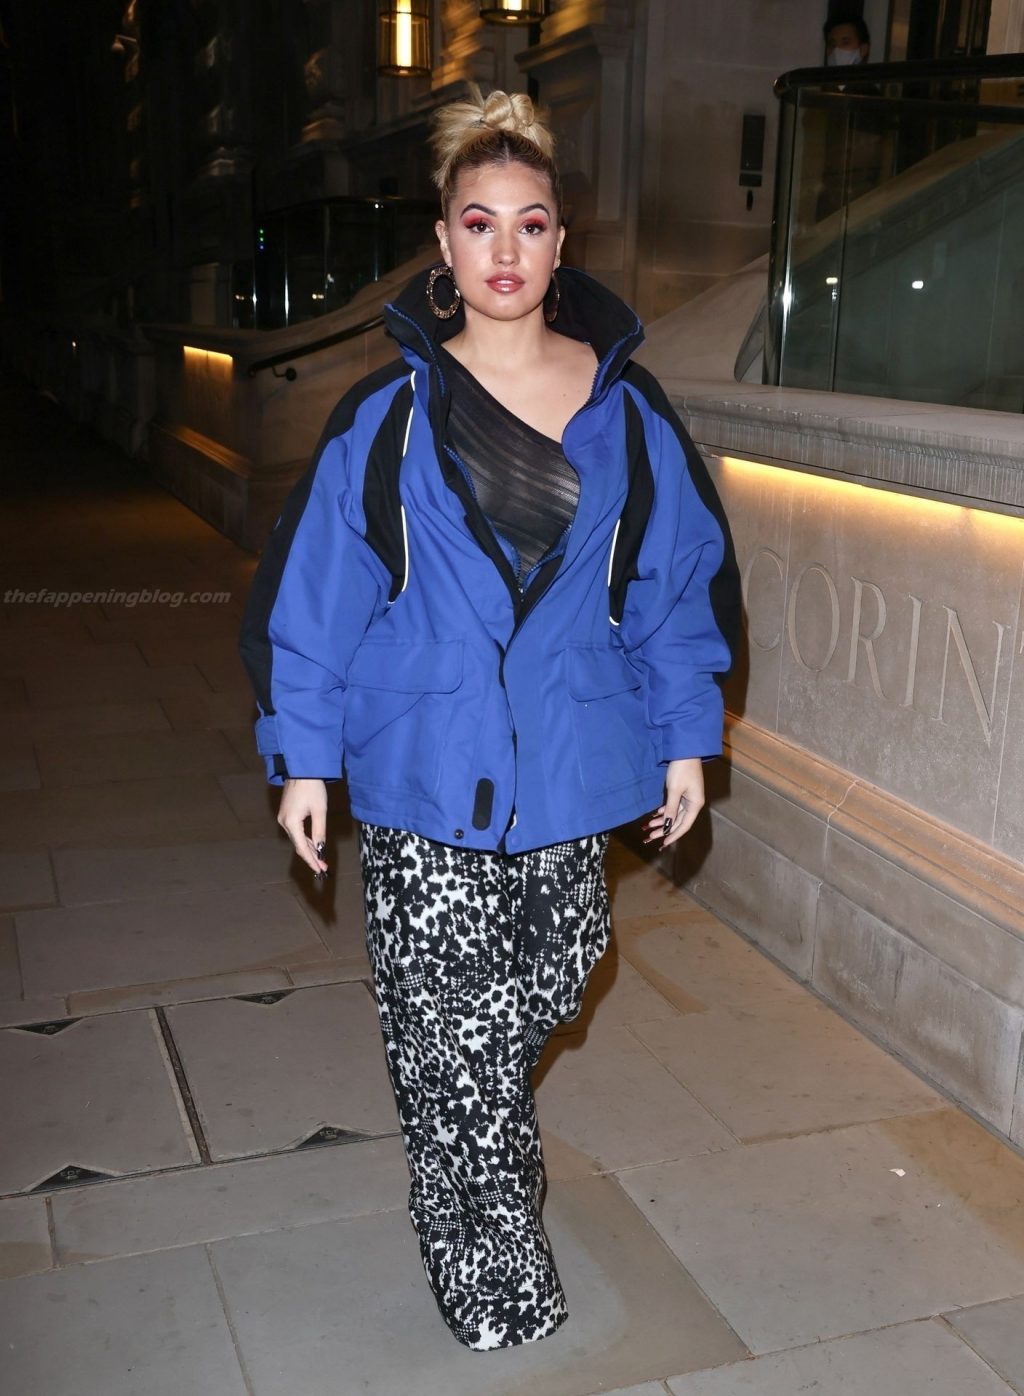 Mabel Looks sensational in a Mesh Top in London (10 Photos)